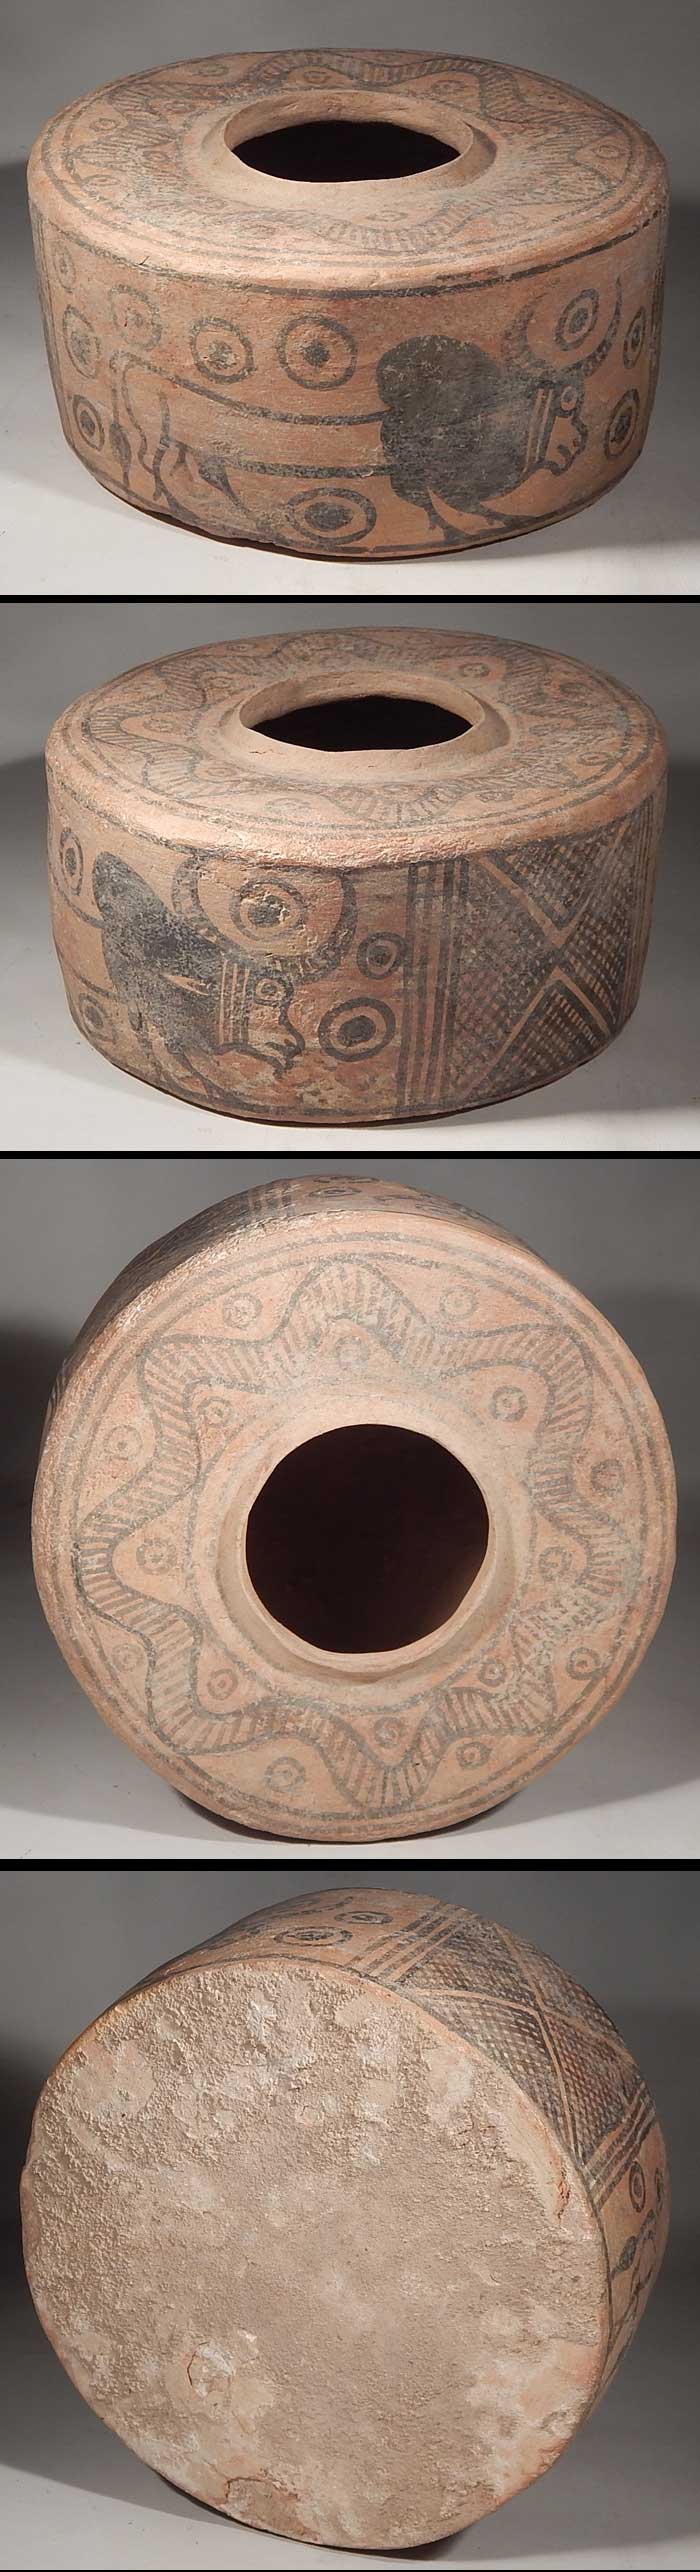 Near Eastern Indus Valley Harappan Pottery Pyxis Vessel